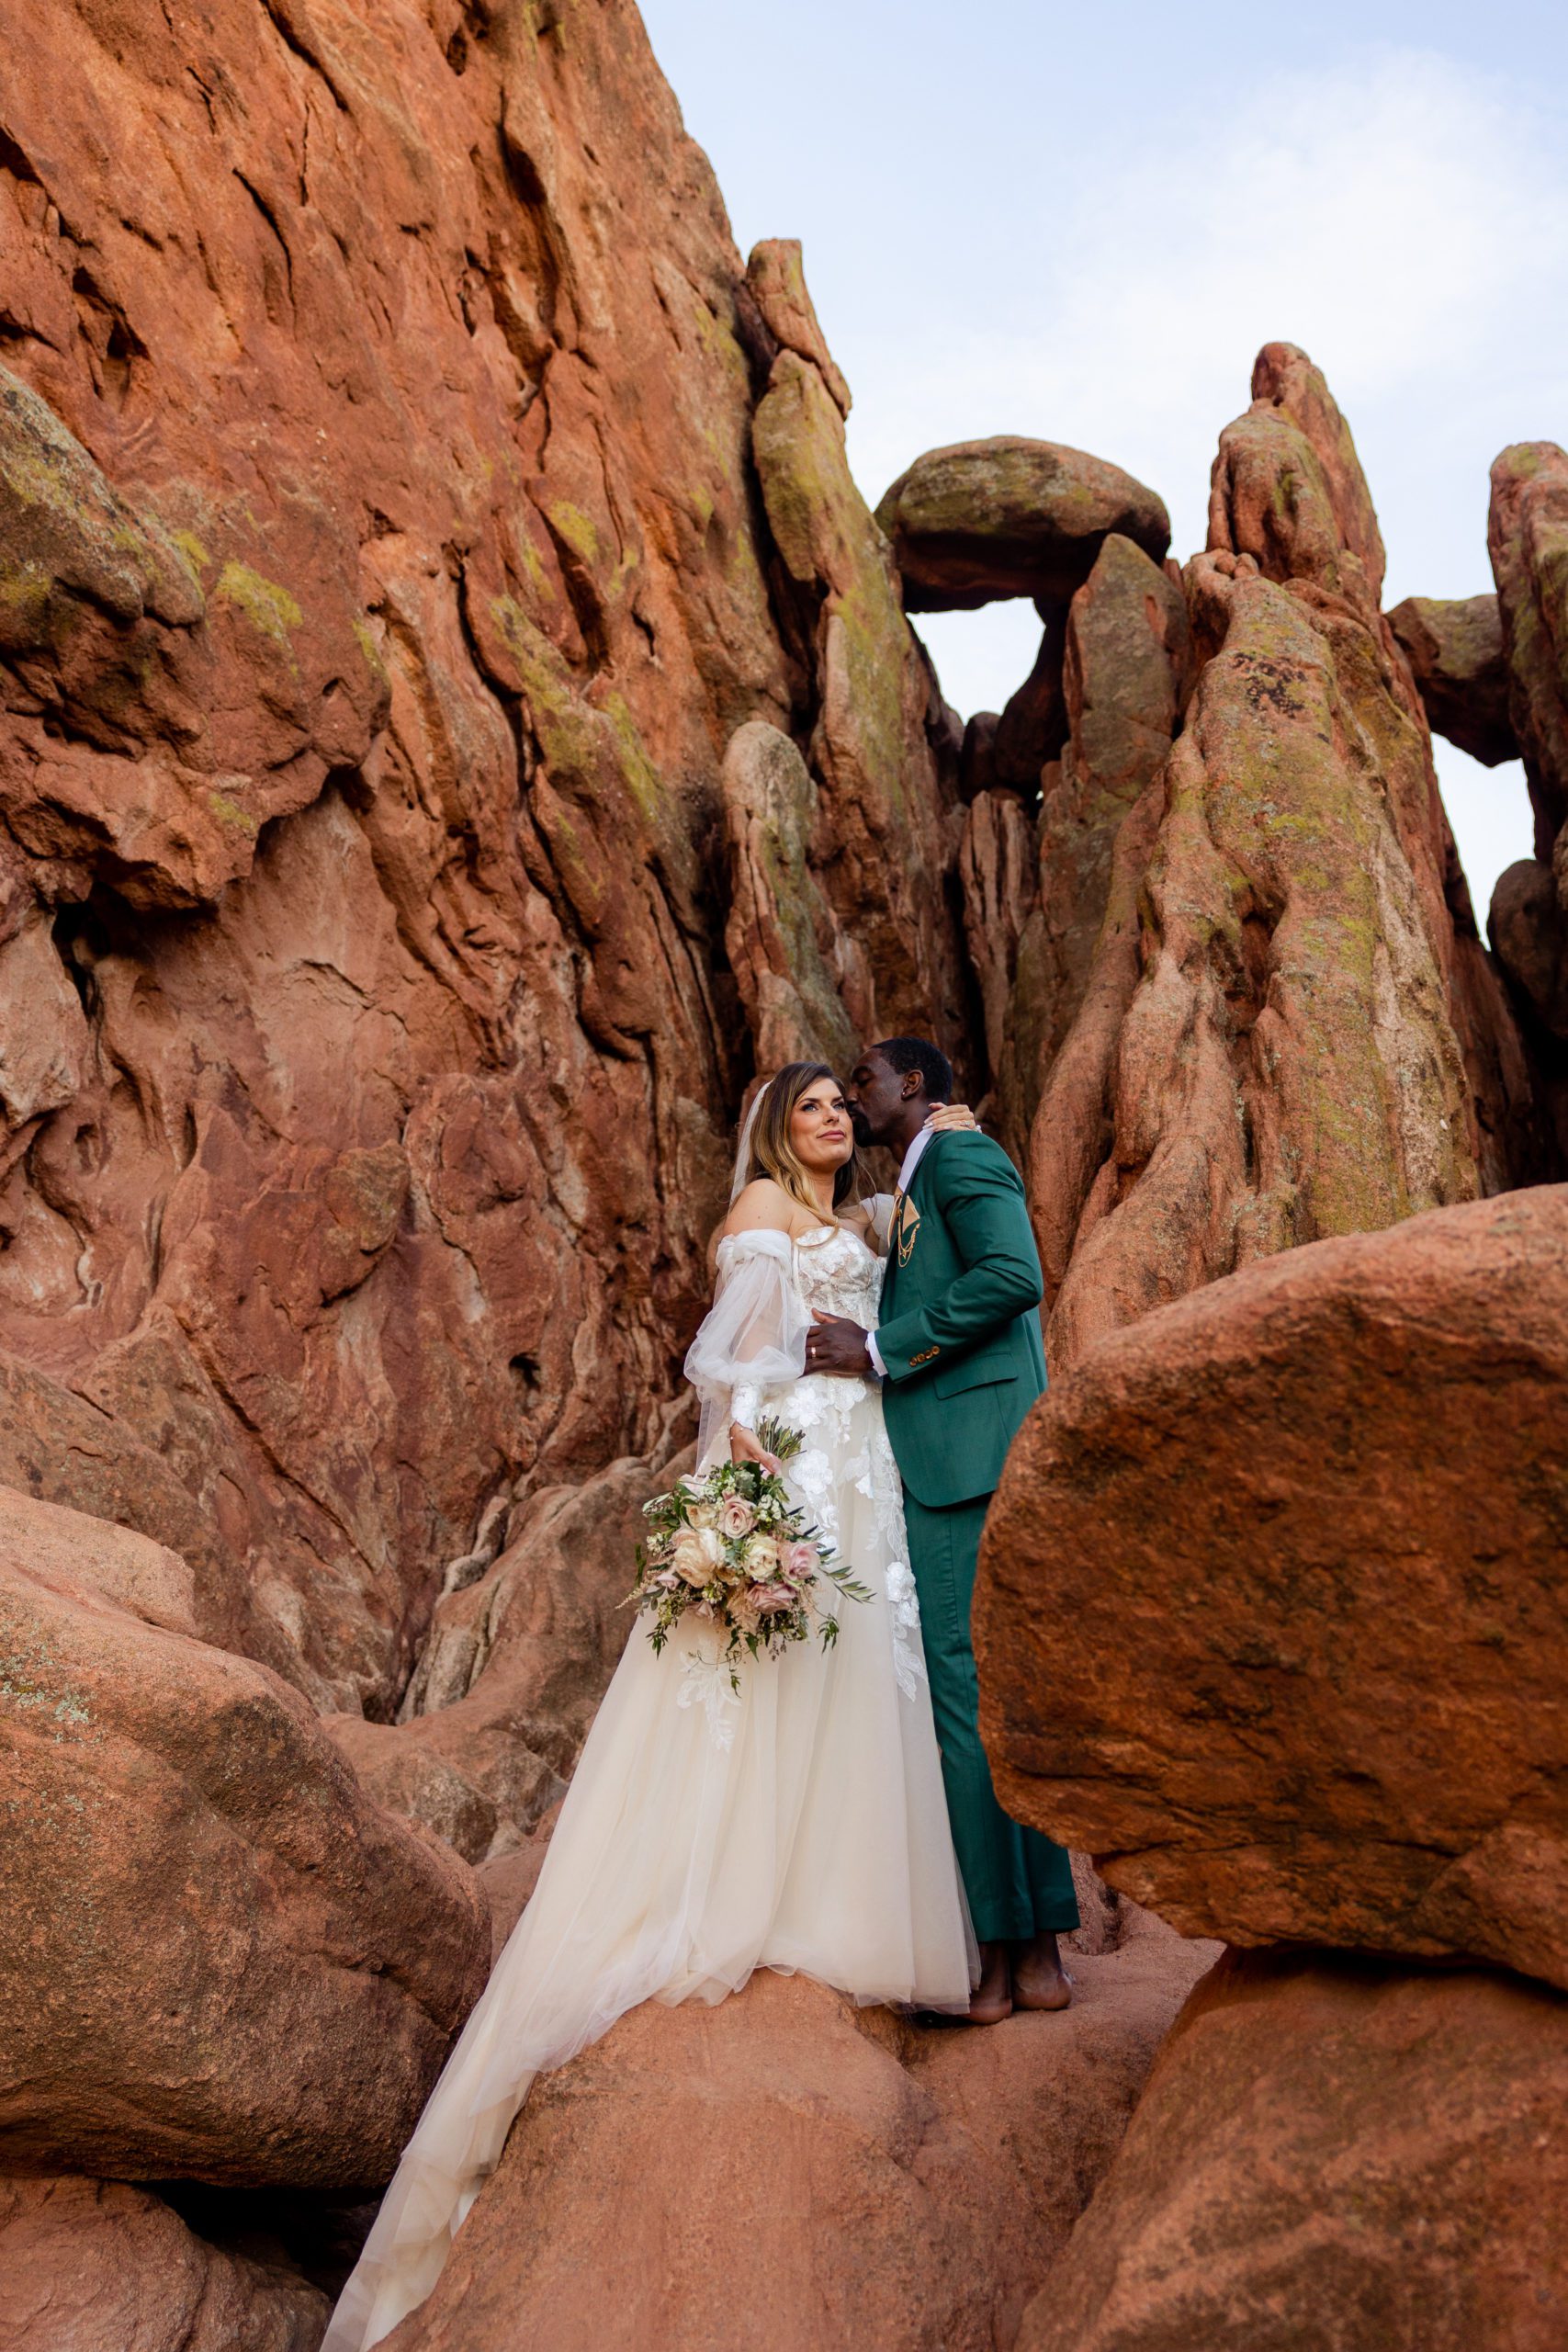 Groom kisses bride on the cheek at the Garden of the Gods. 